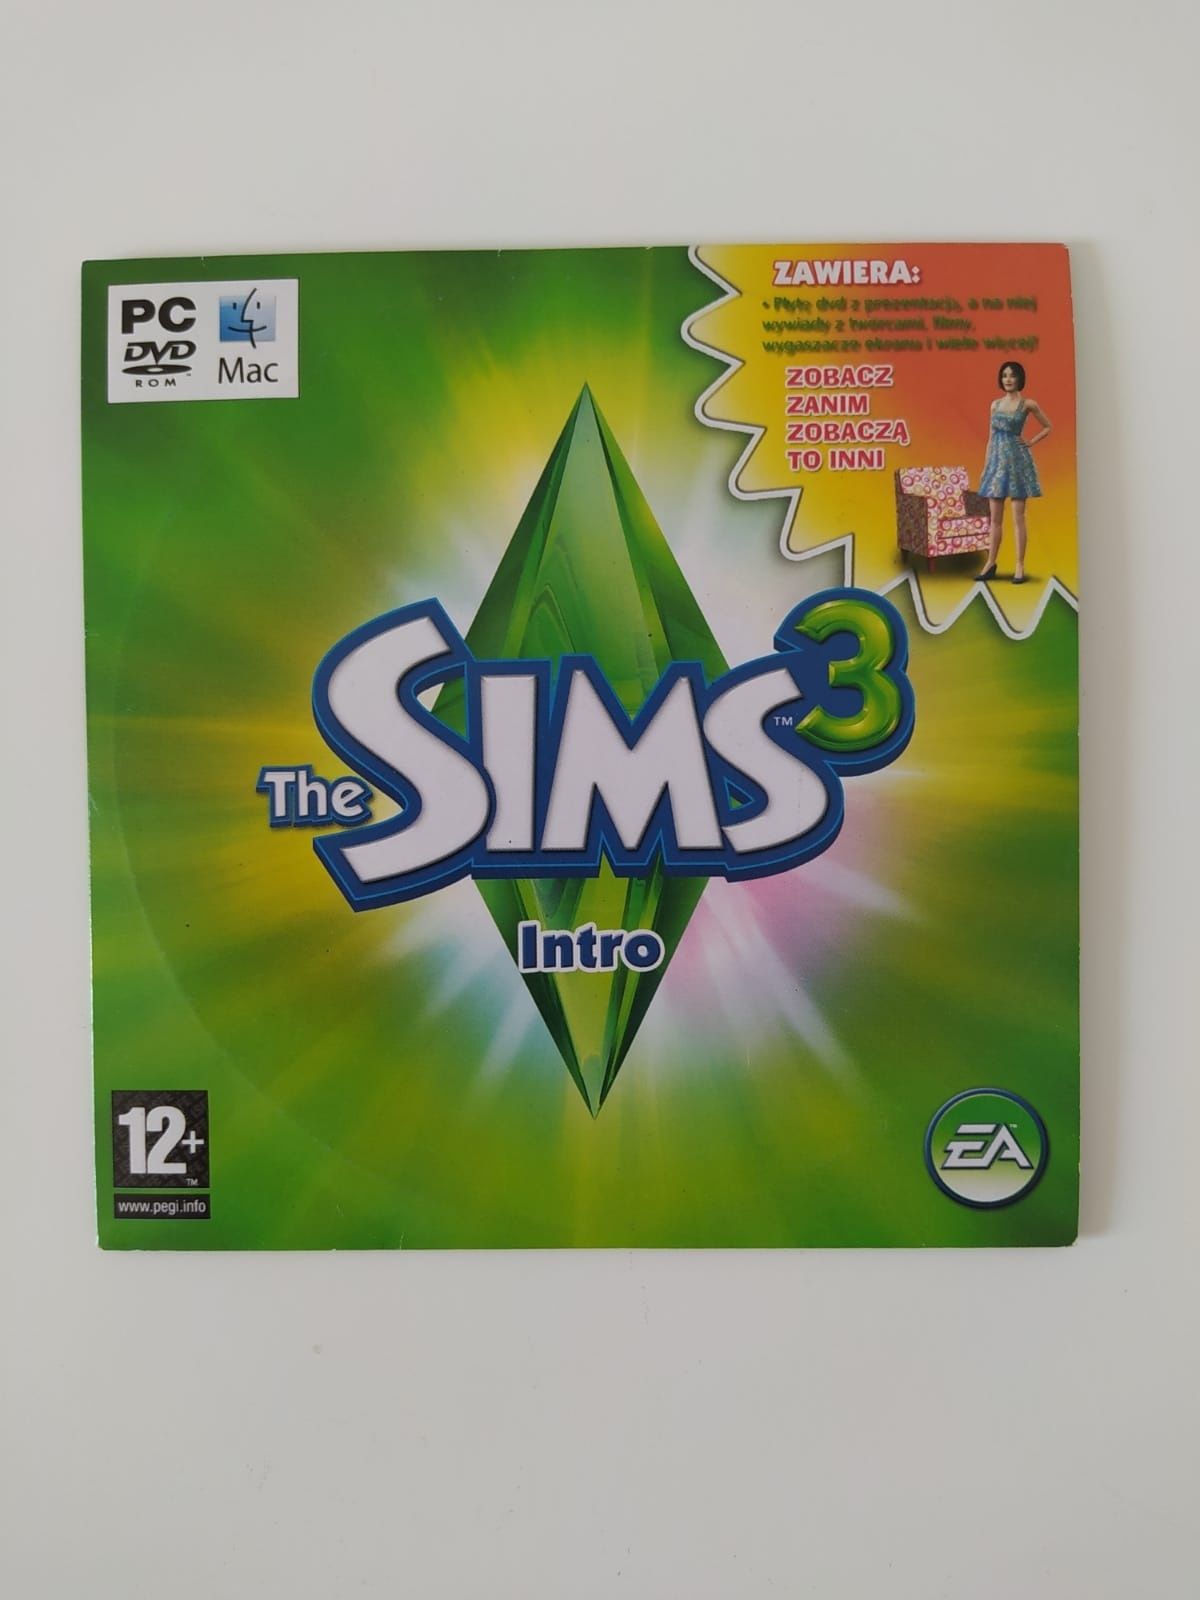 The Sims 3 "Intro"